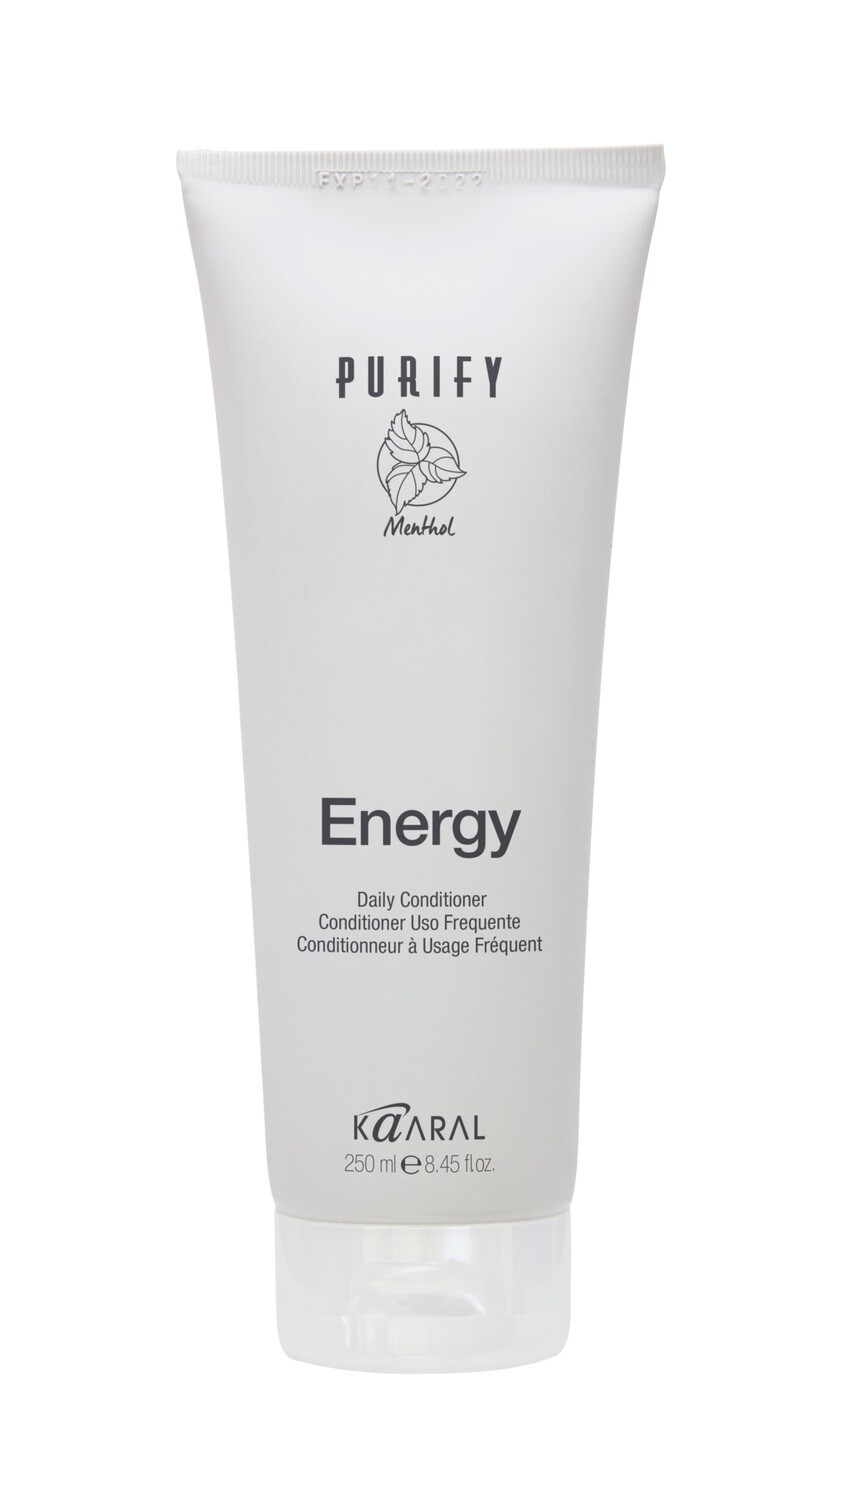 KAARAL PURIFY ENERGY CONDITIONER USO FREQUENTE 250ML